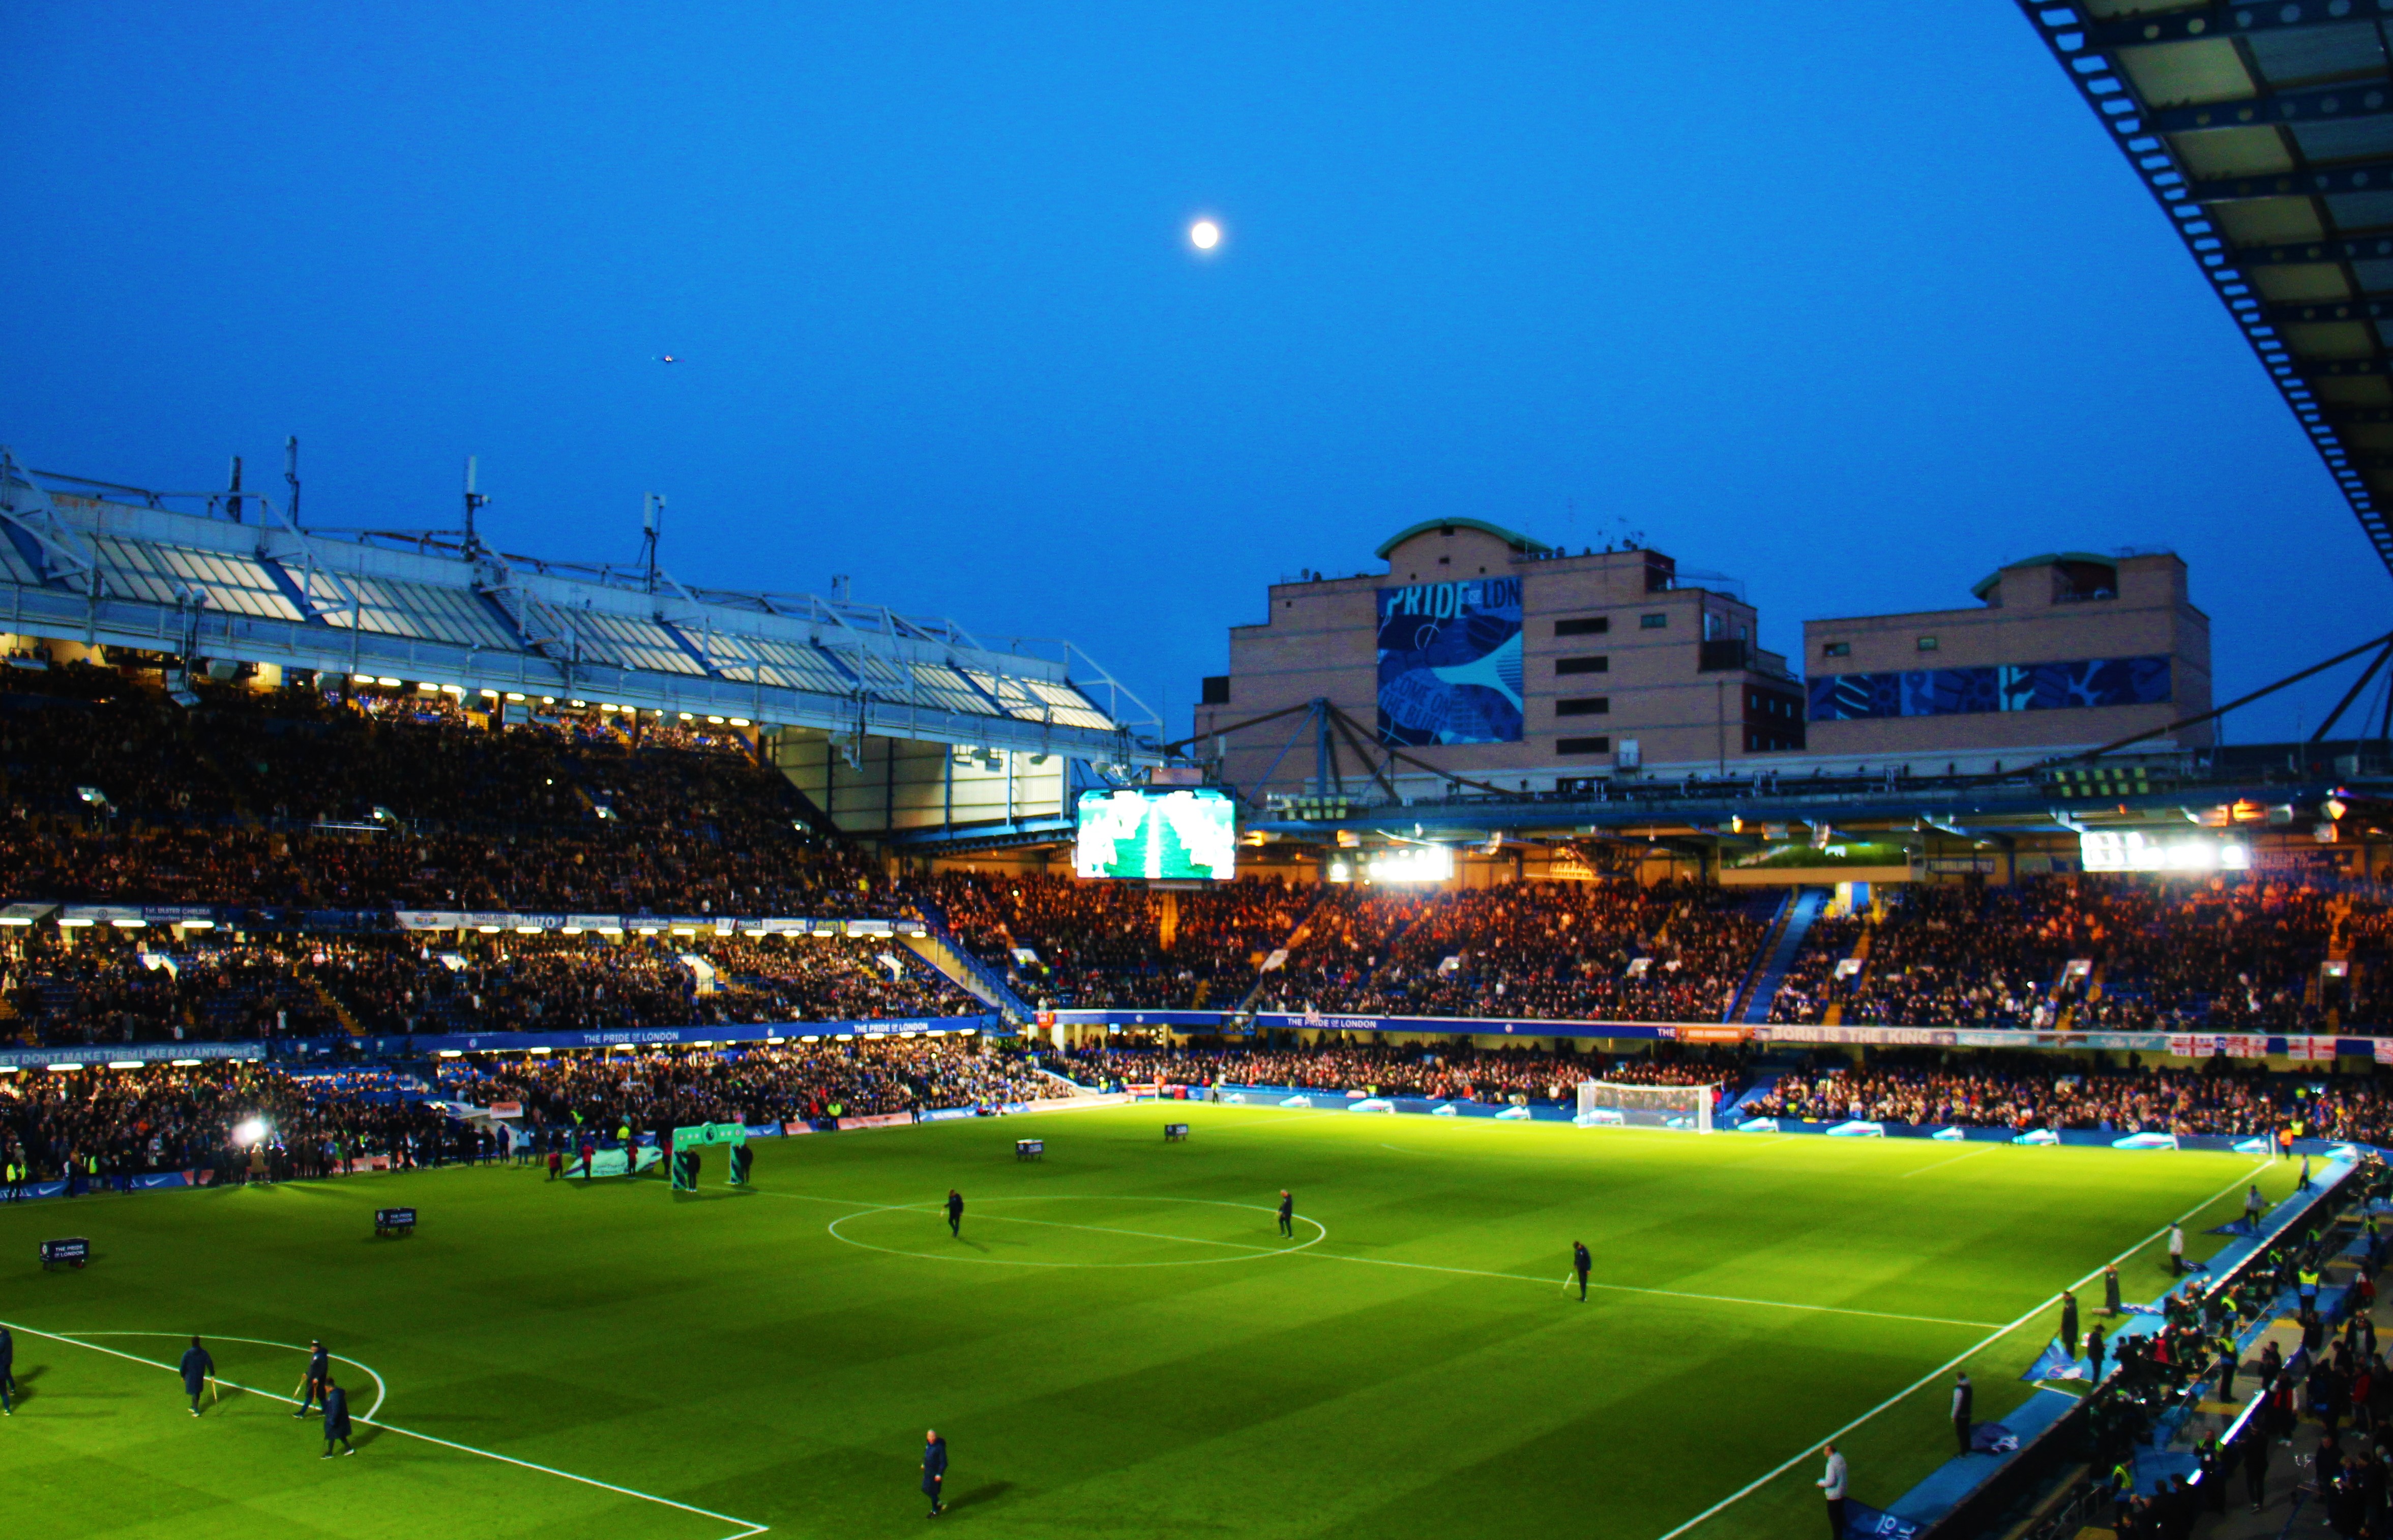 Chelsea to have a new chance to leave Stamford Bridge? - We Ain't